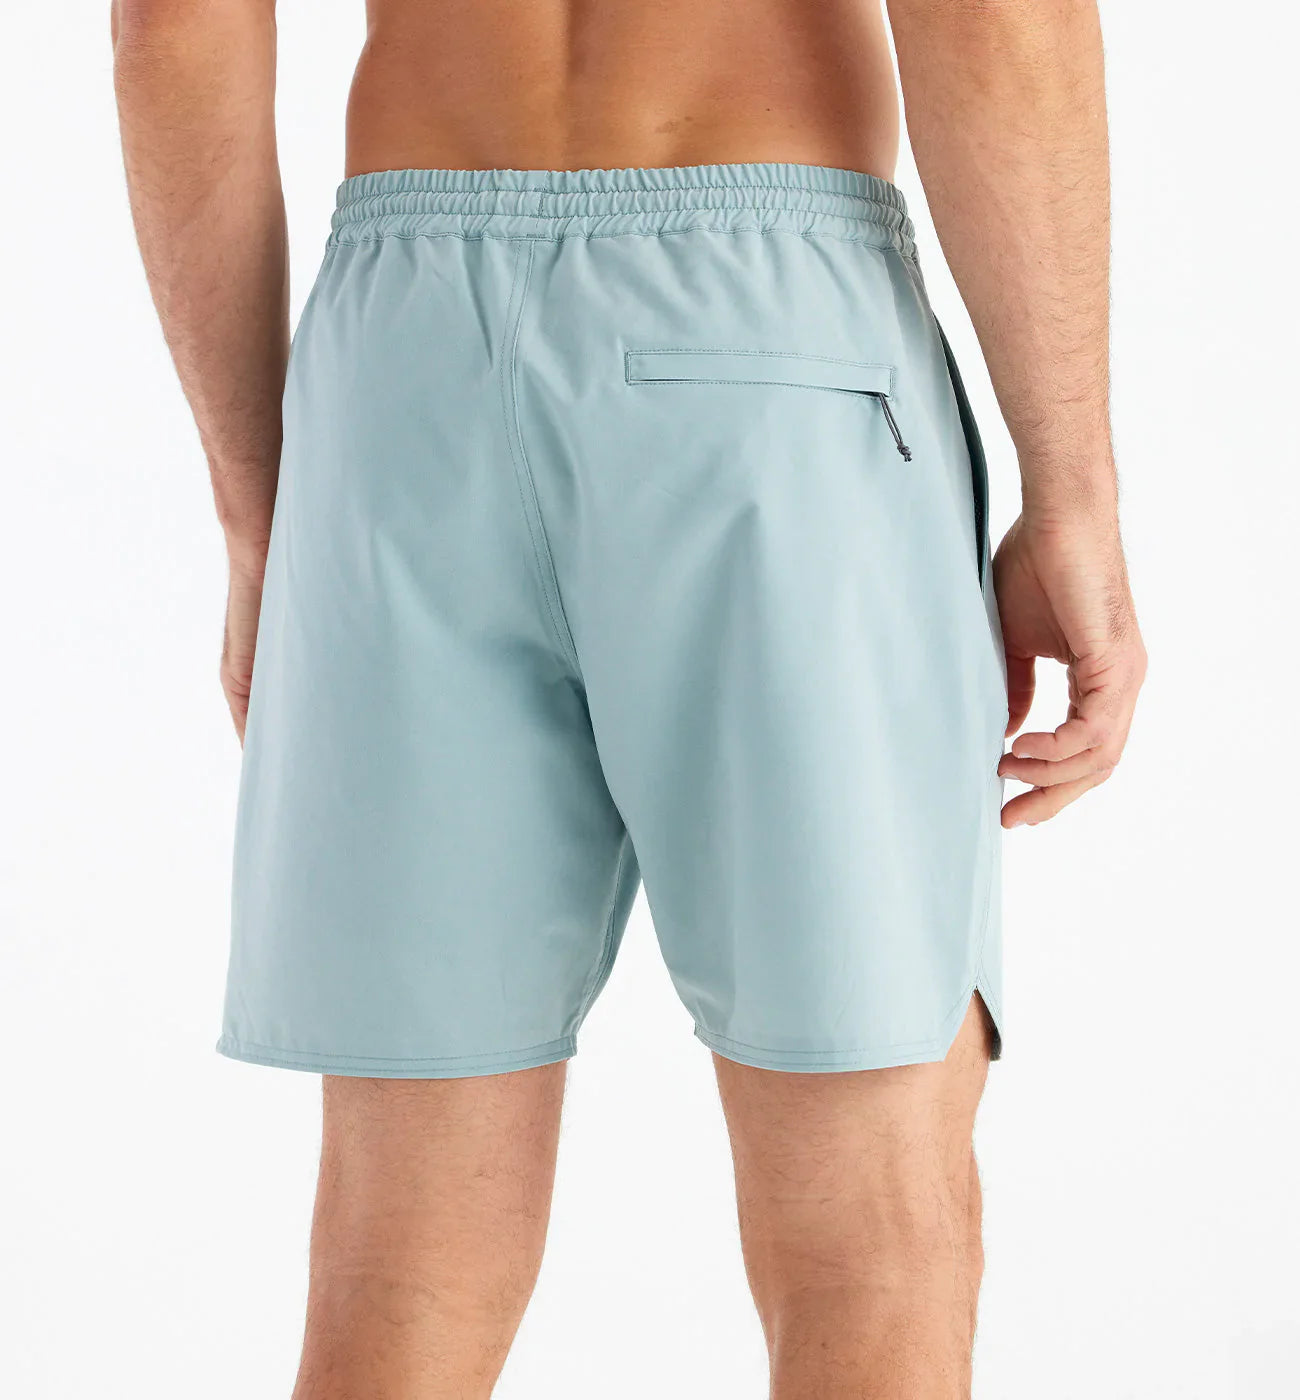 Free Fly Apparel Men's Andros Trunk - 7